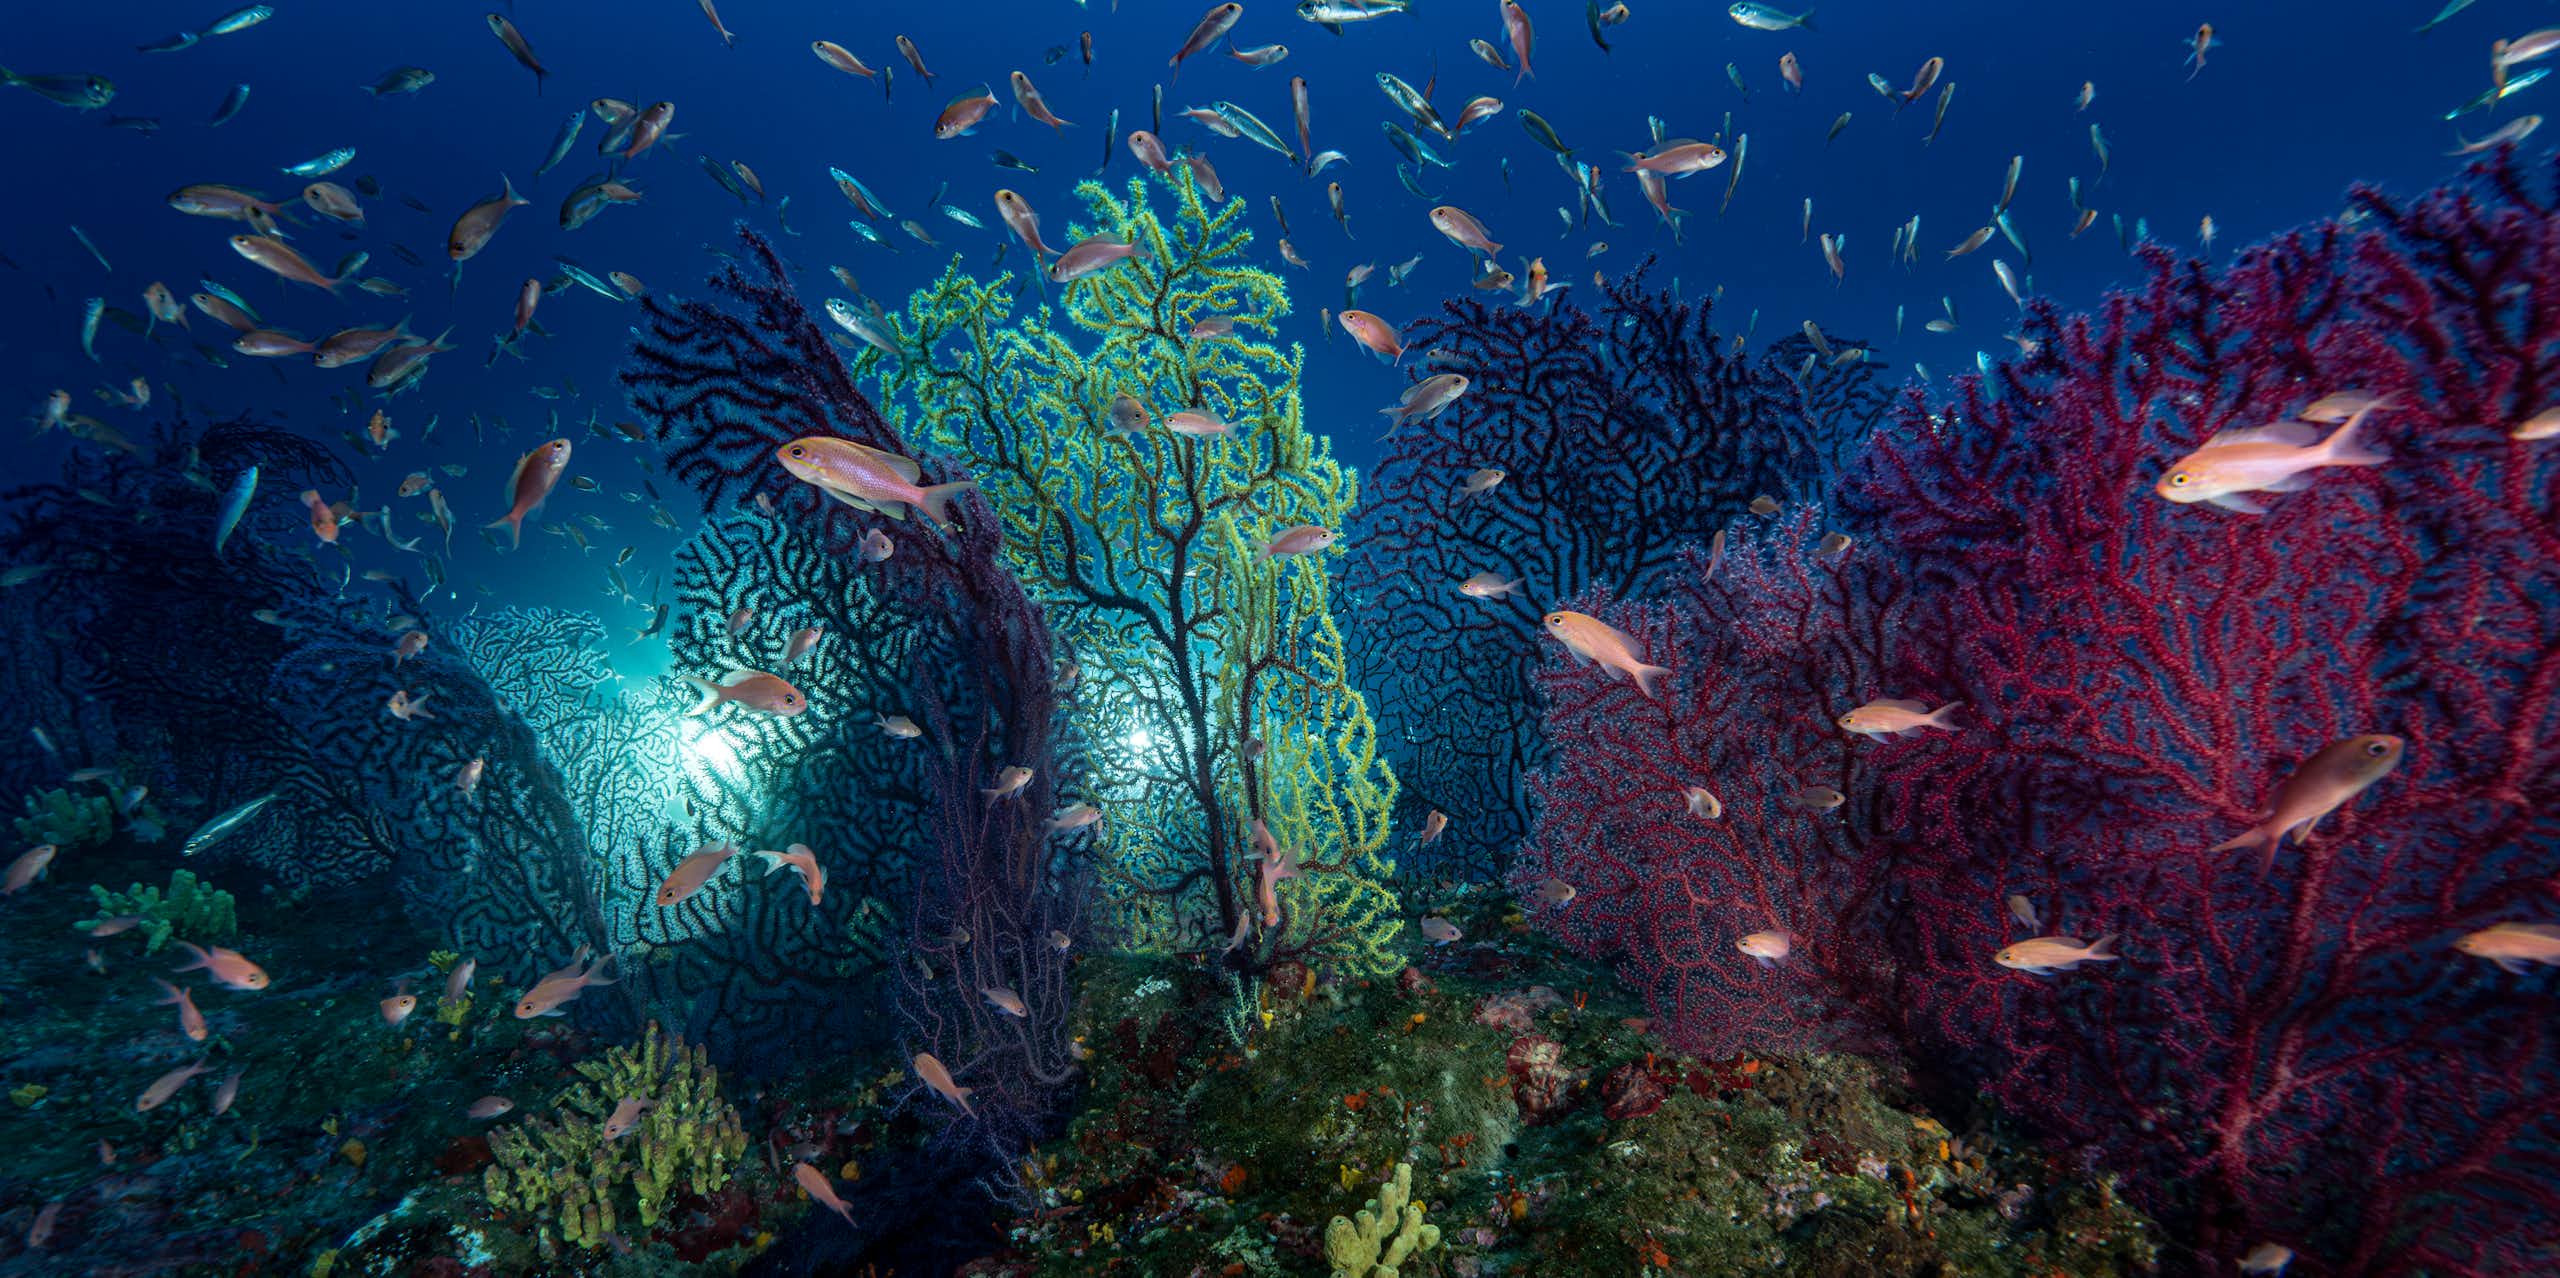 The deep Mediterraneen: a temporary refuge for gorgonian coral forests facing marine heat waves